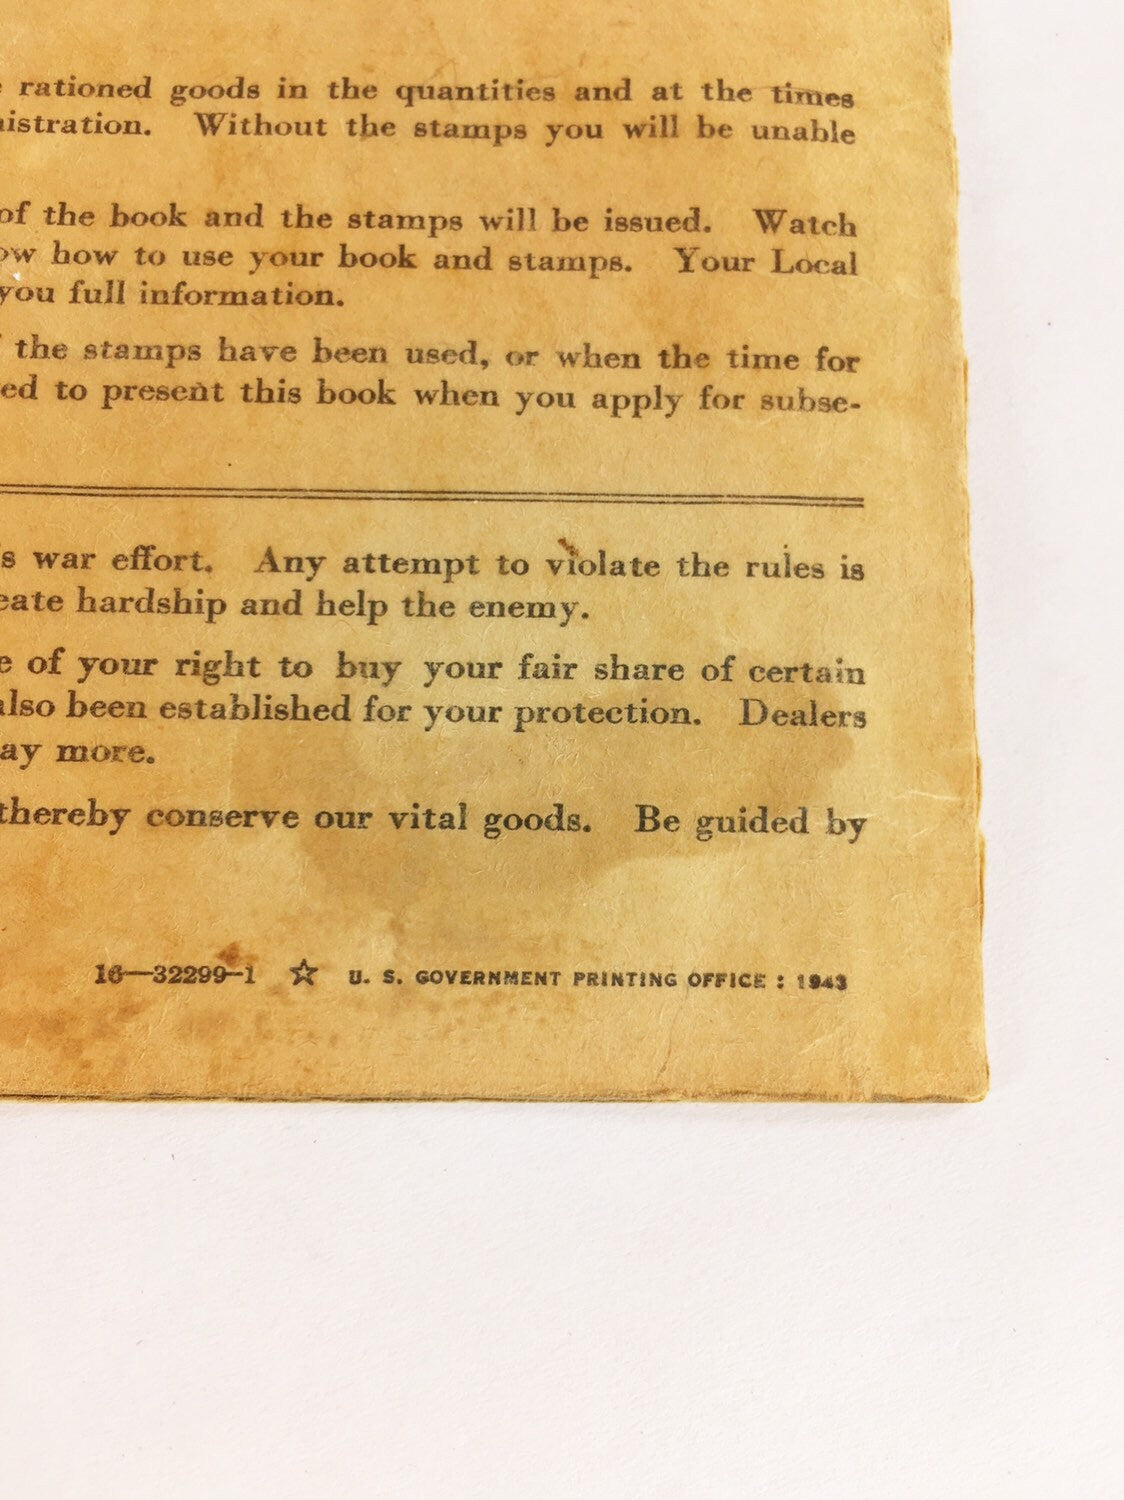 Authentic World War 2 WWII rationing booklet. Complete with stamps by the Office of Price Administration circa 1943. Gas certificate Book 4